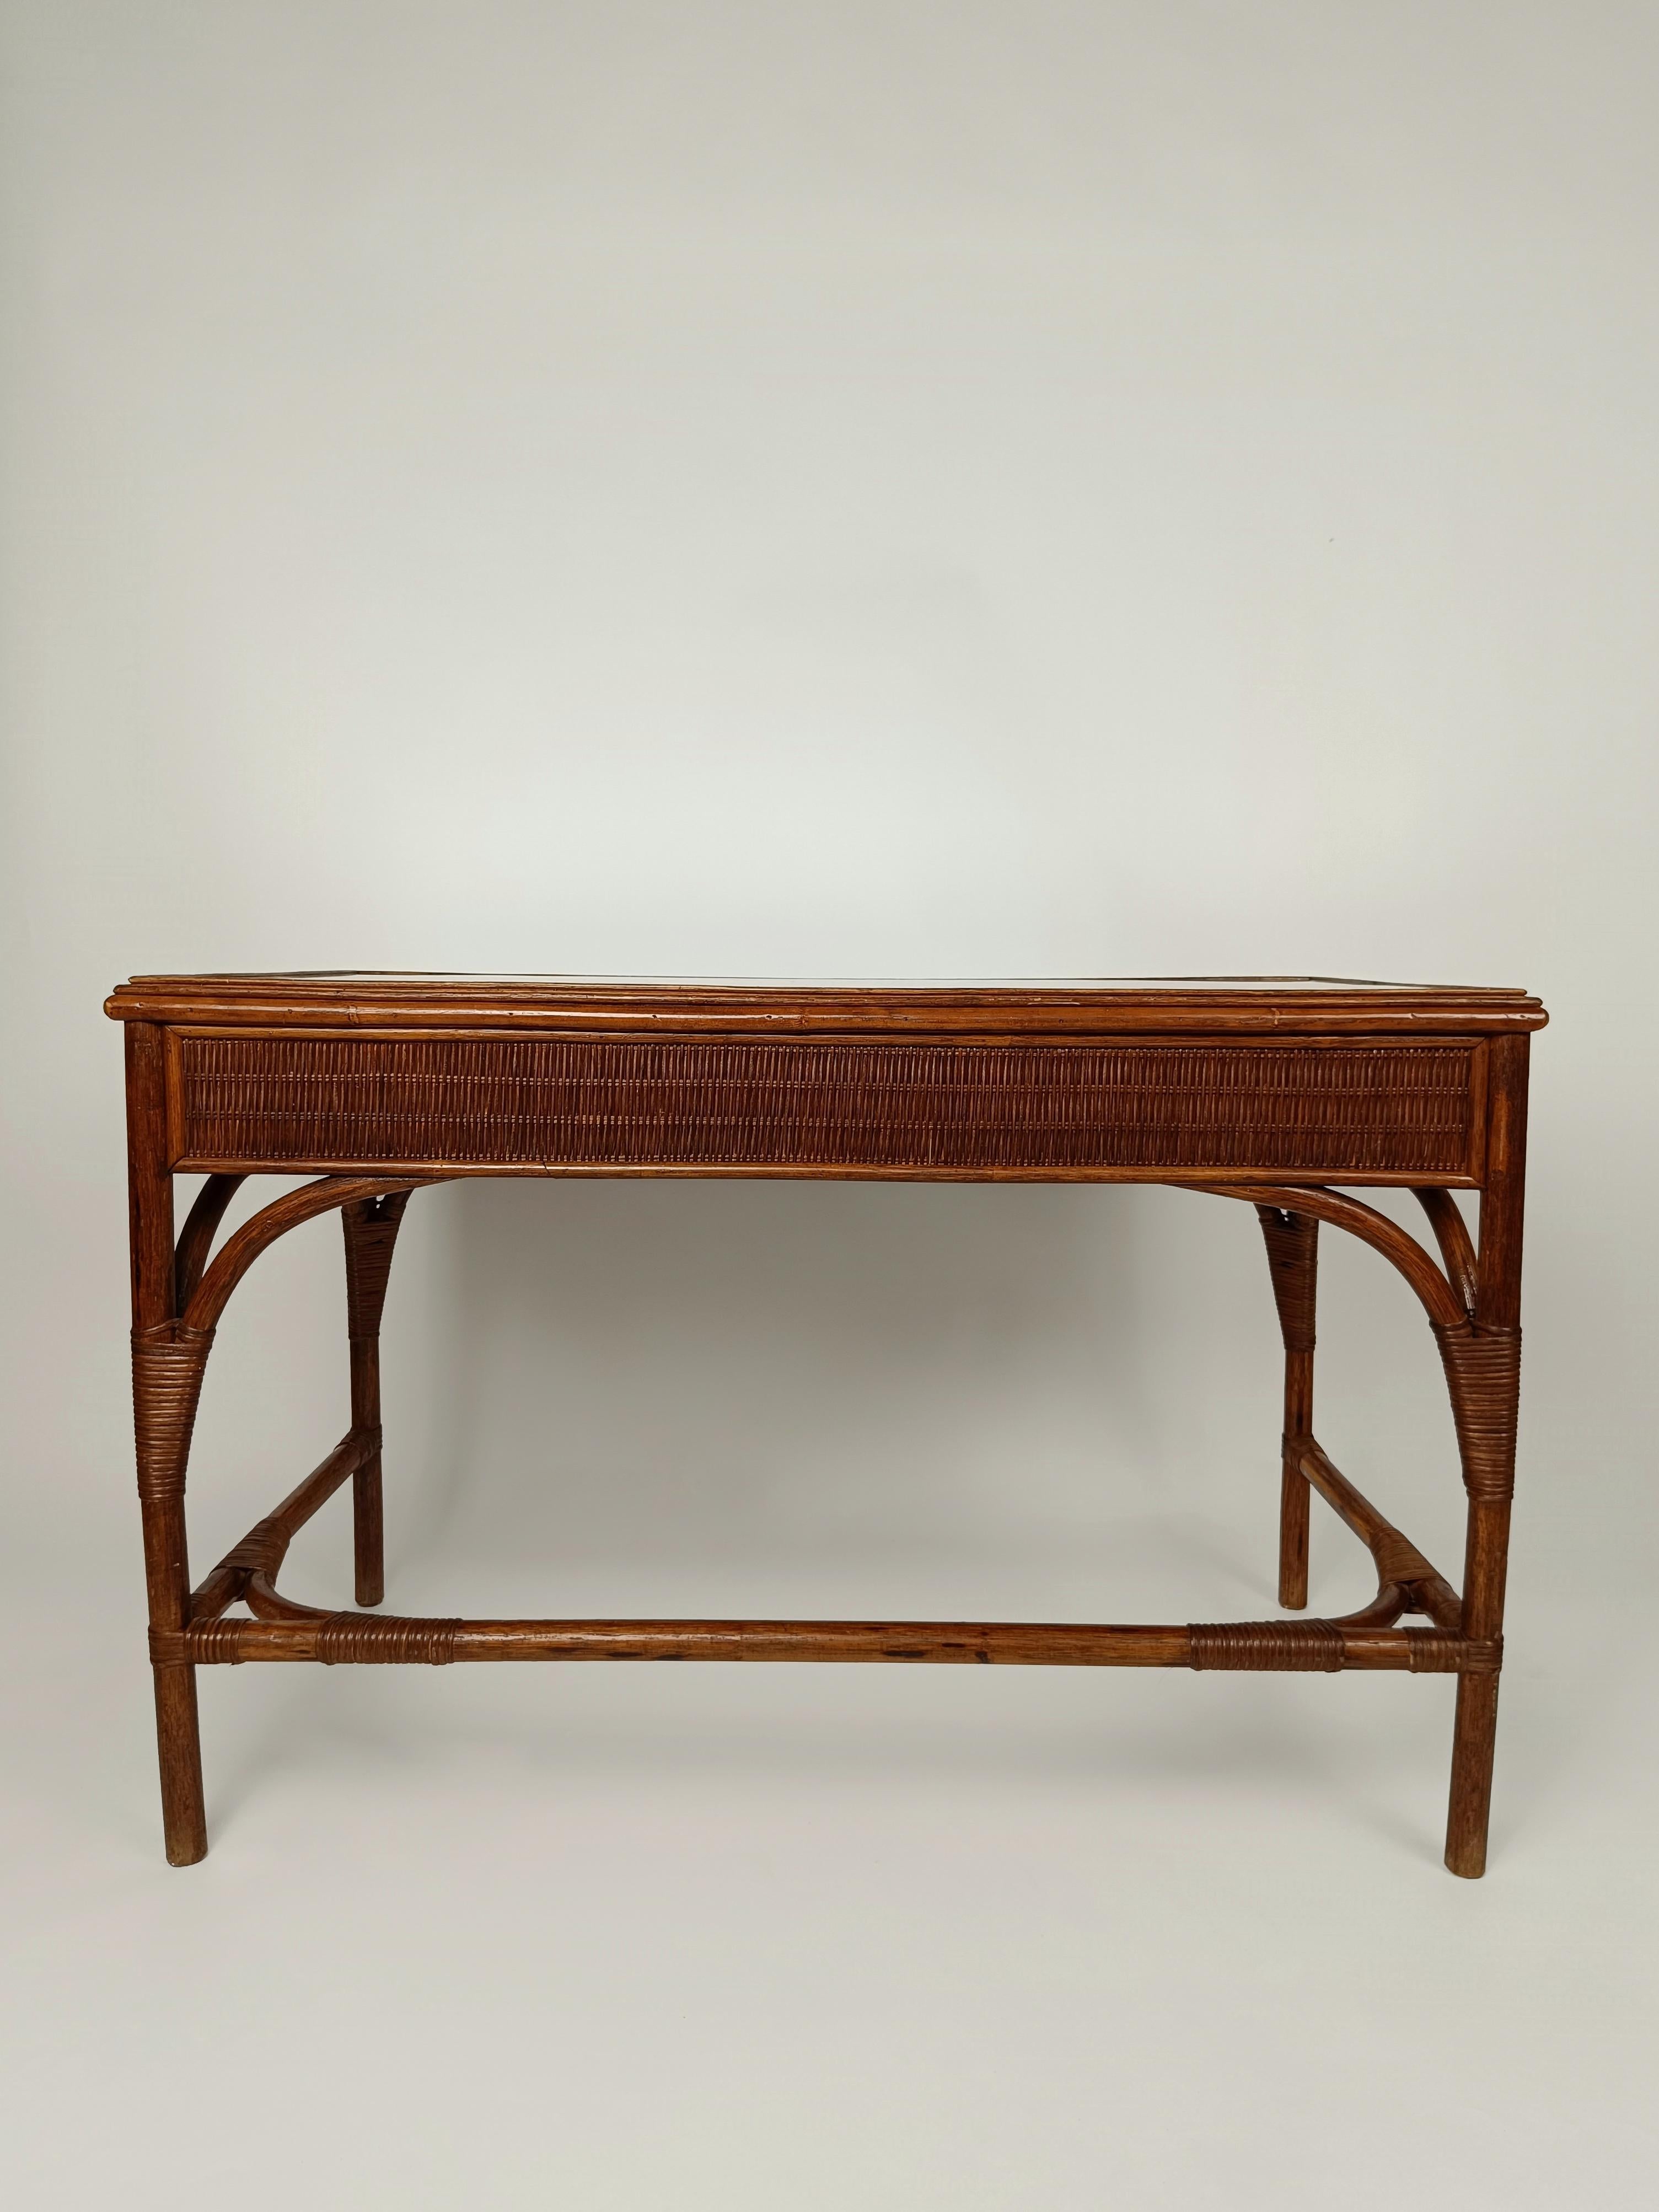 Midcentury Italian Writing Desk with Drawers and Chair, in Bamboo Cane & Wicker For Sale 4